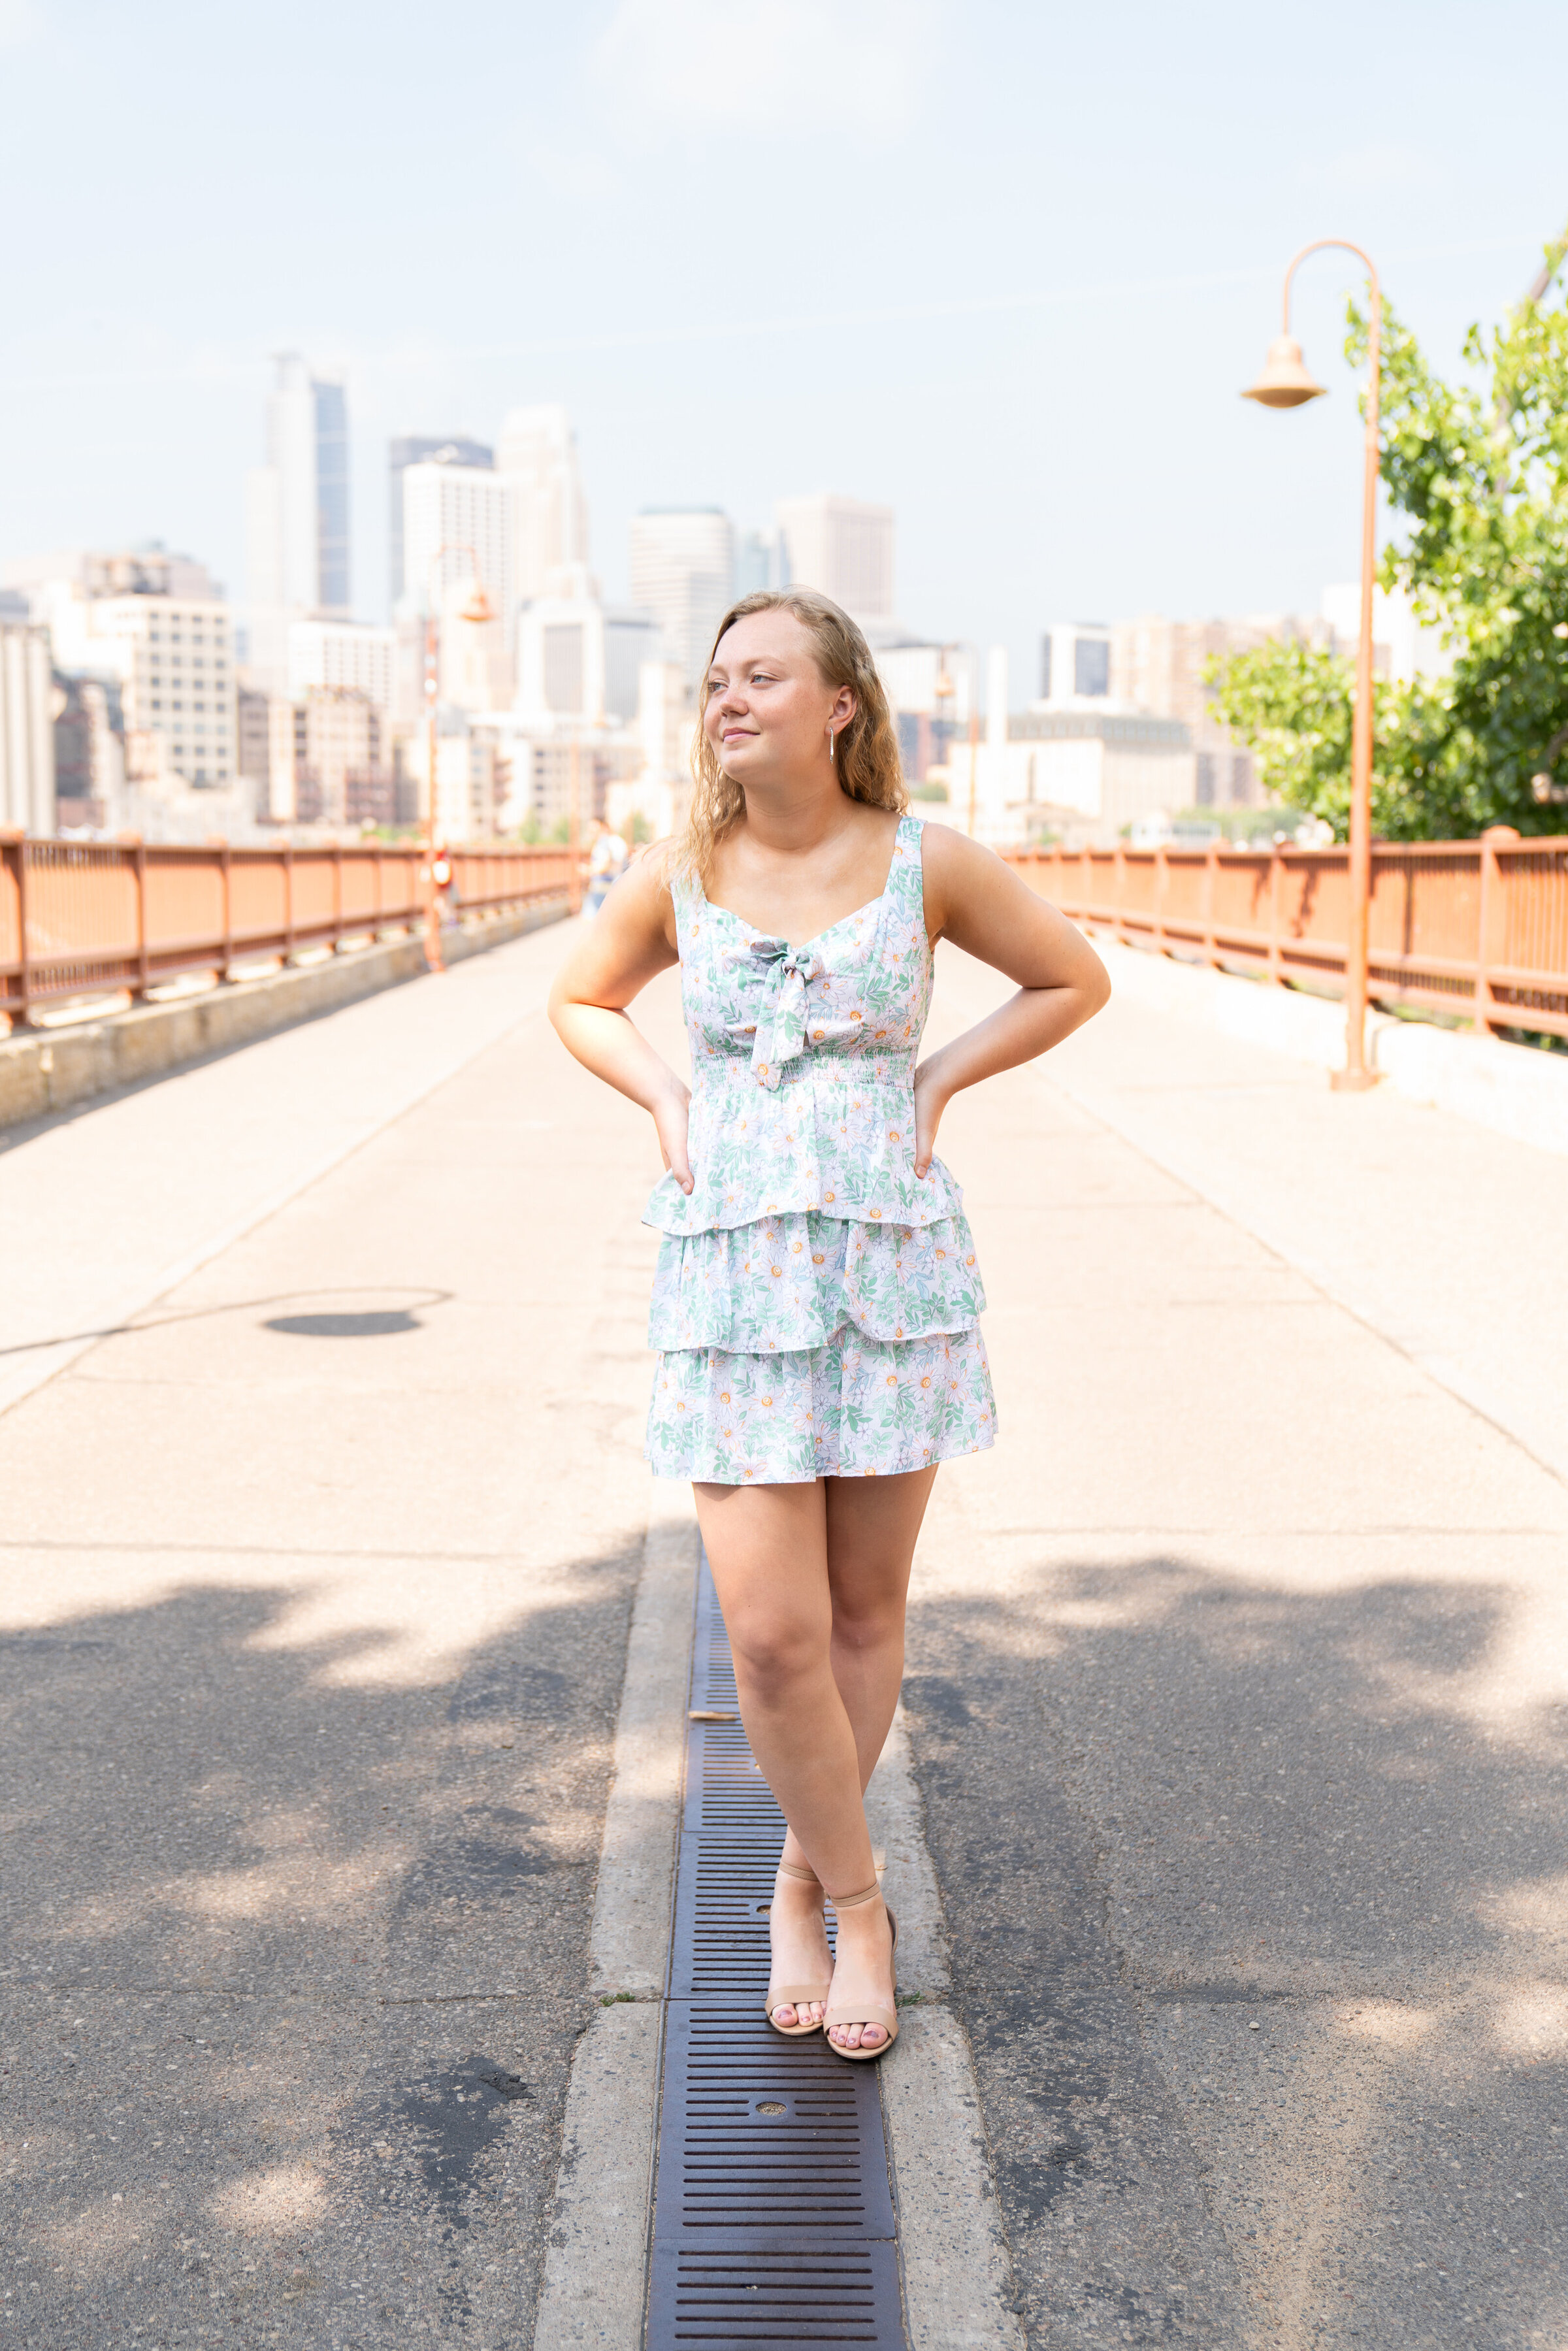 Senior picture locations near me - How much are senior pictures - Senior photography tips